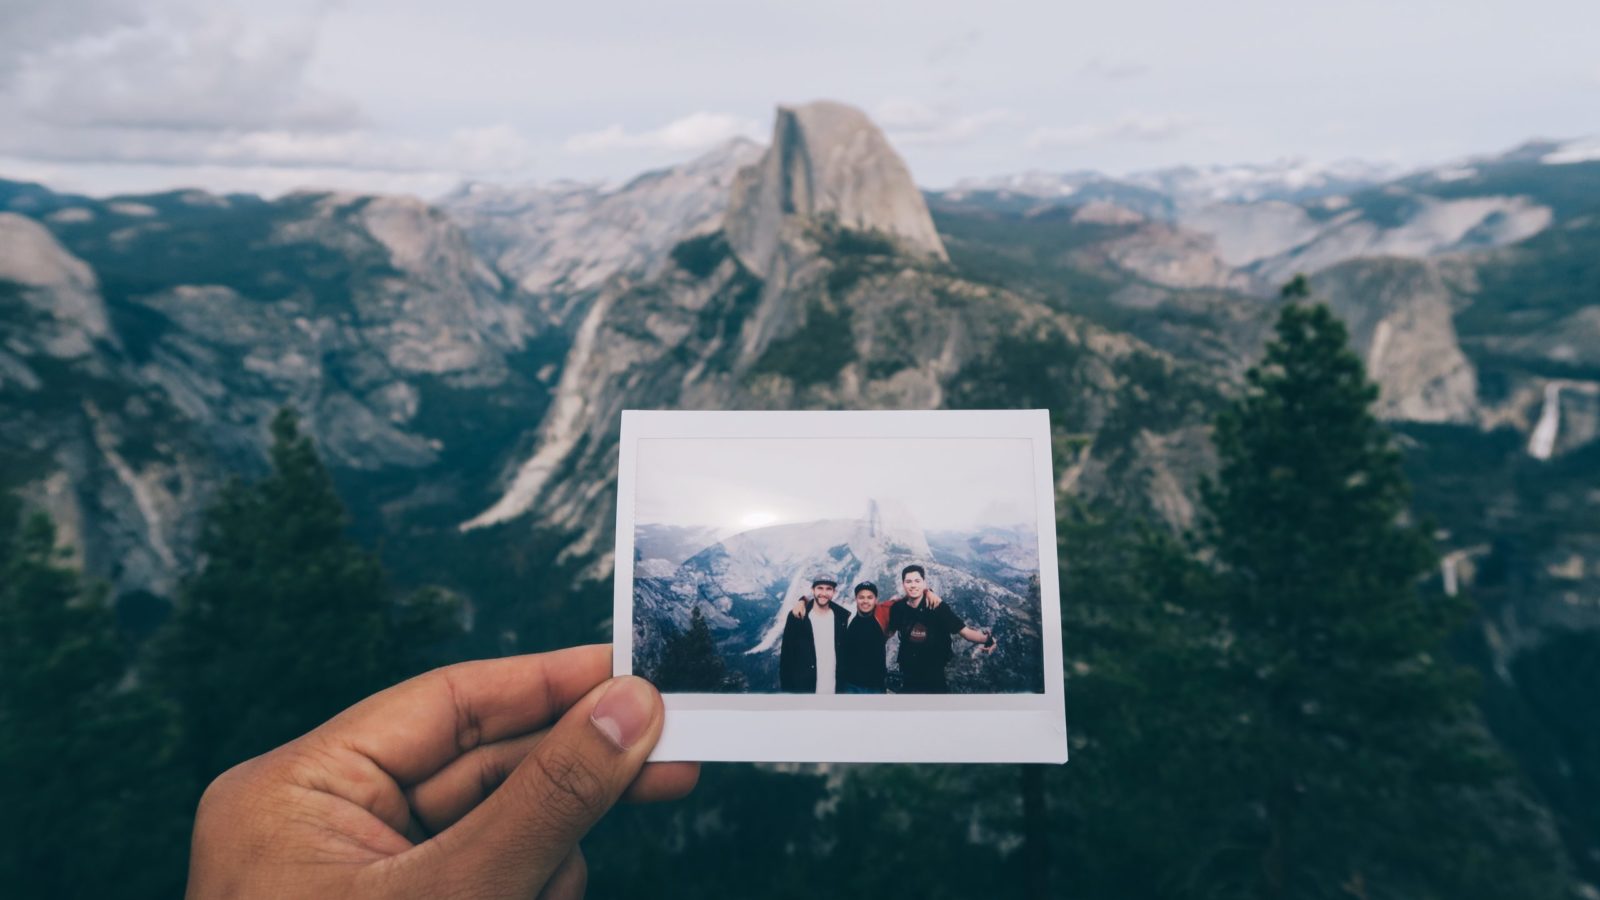 photo of a photo in front of a view of iconic U.S. attraction Yosemite National Park with Half Dome in the distance